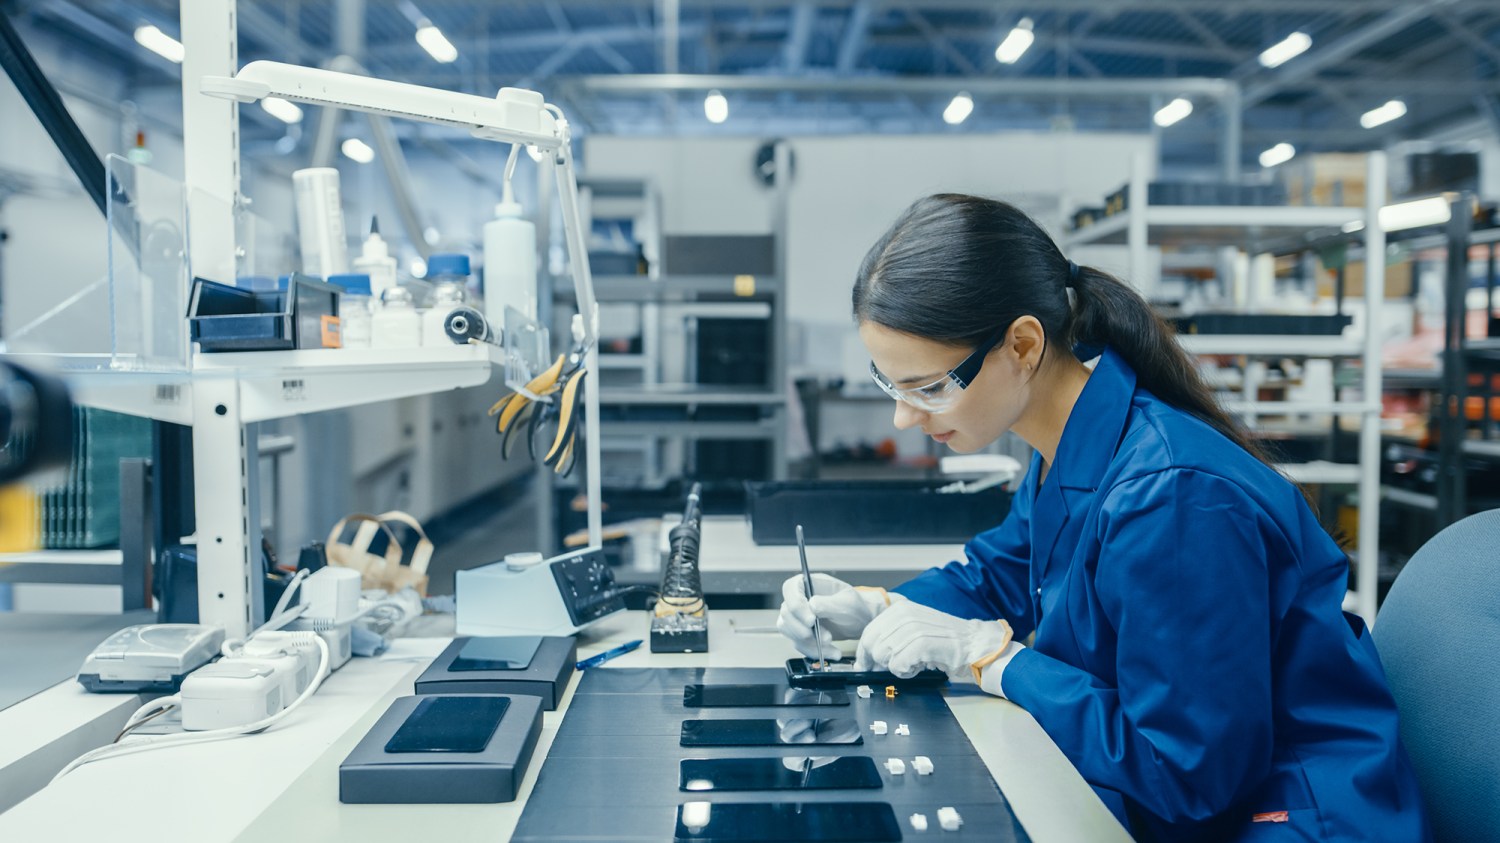 Young Female in Blue Work Coat is Assembling Printed Circuit Boards for Smartphones. Electronics Factory Workers in a High Tech Factory Facility. Photo: Shutterstock